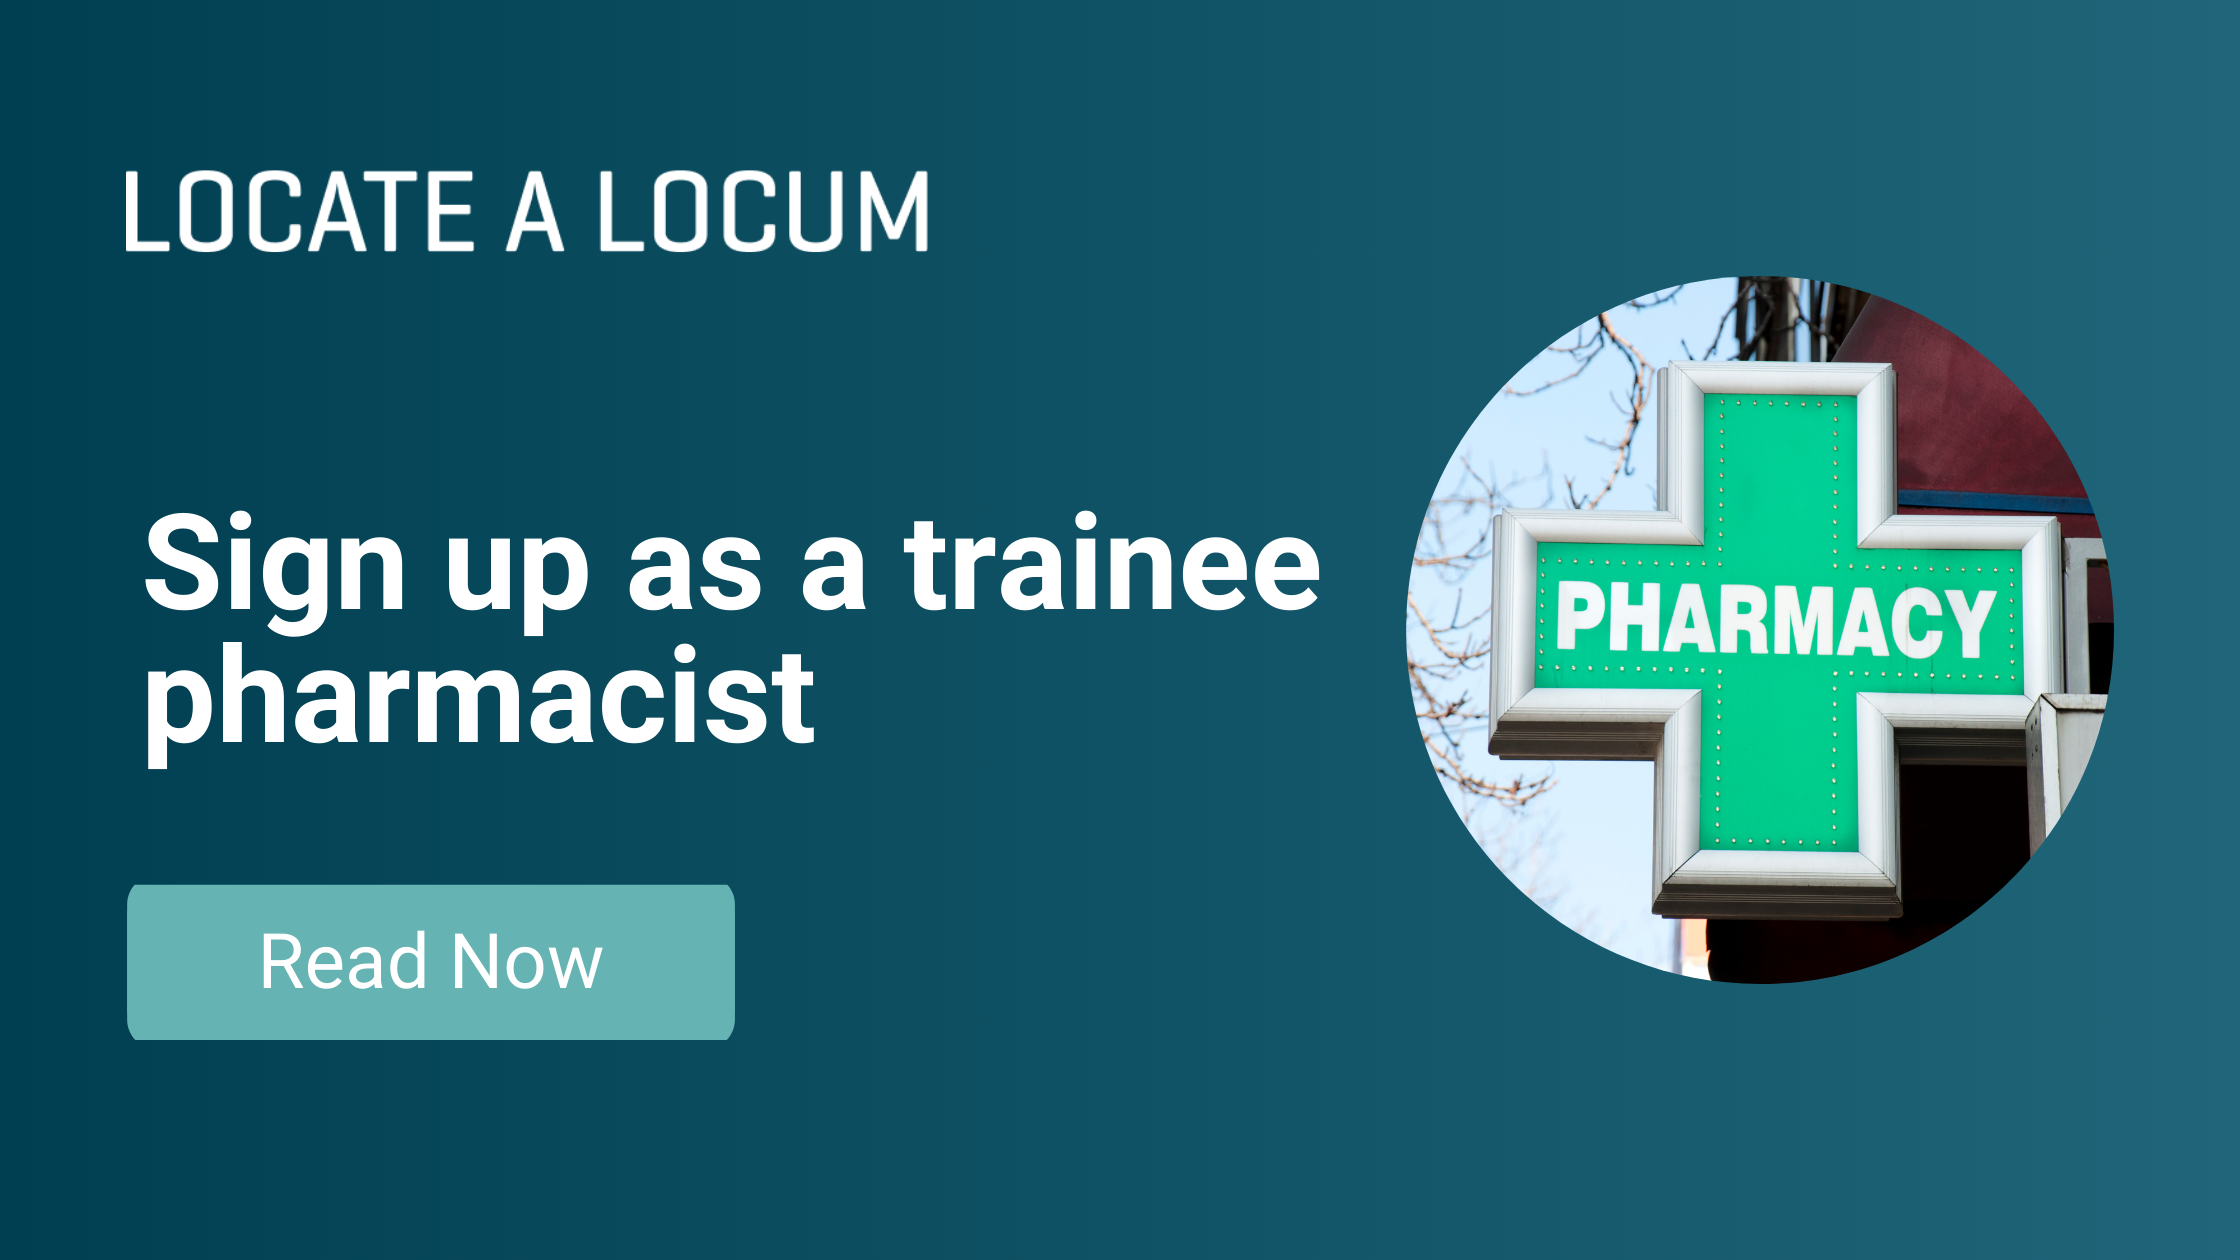 sign-up-to-locate-a-locum-as-a-trainee-pharmacist